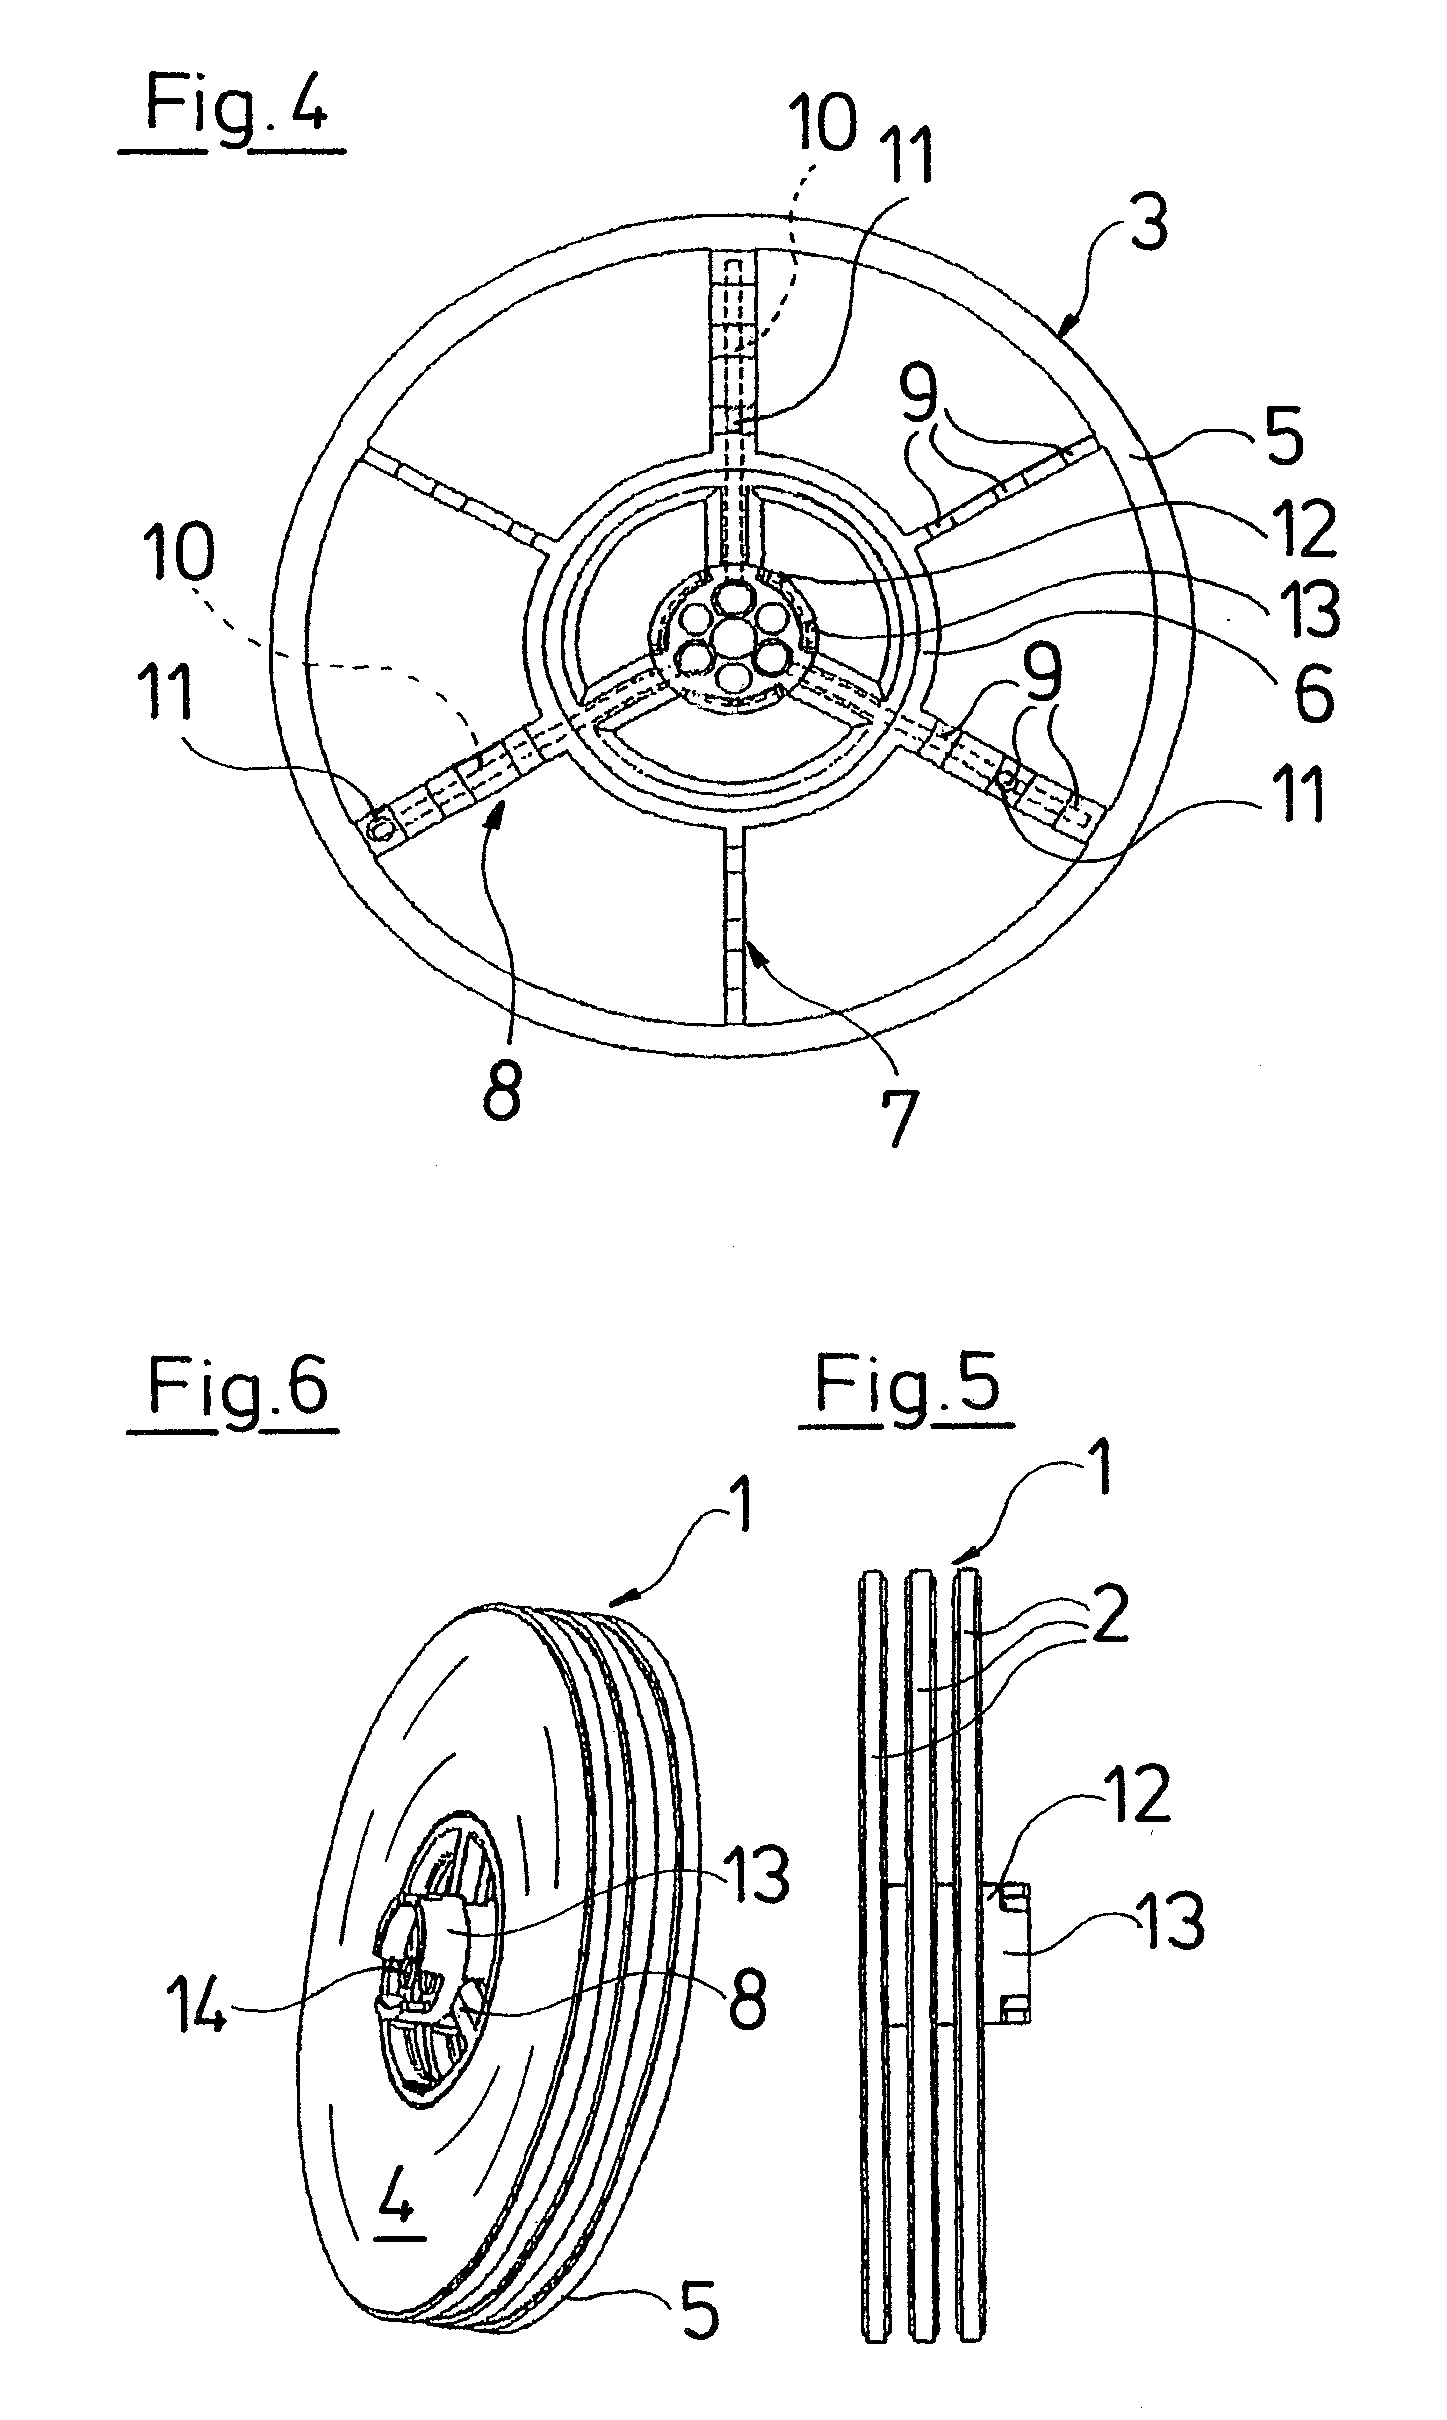 Reactor Comprising a Stack of Filter Plates